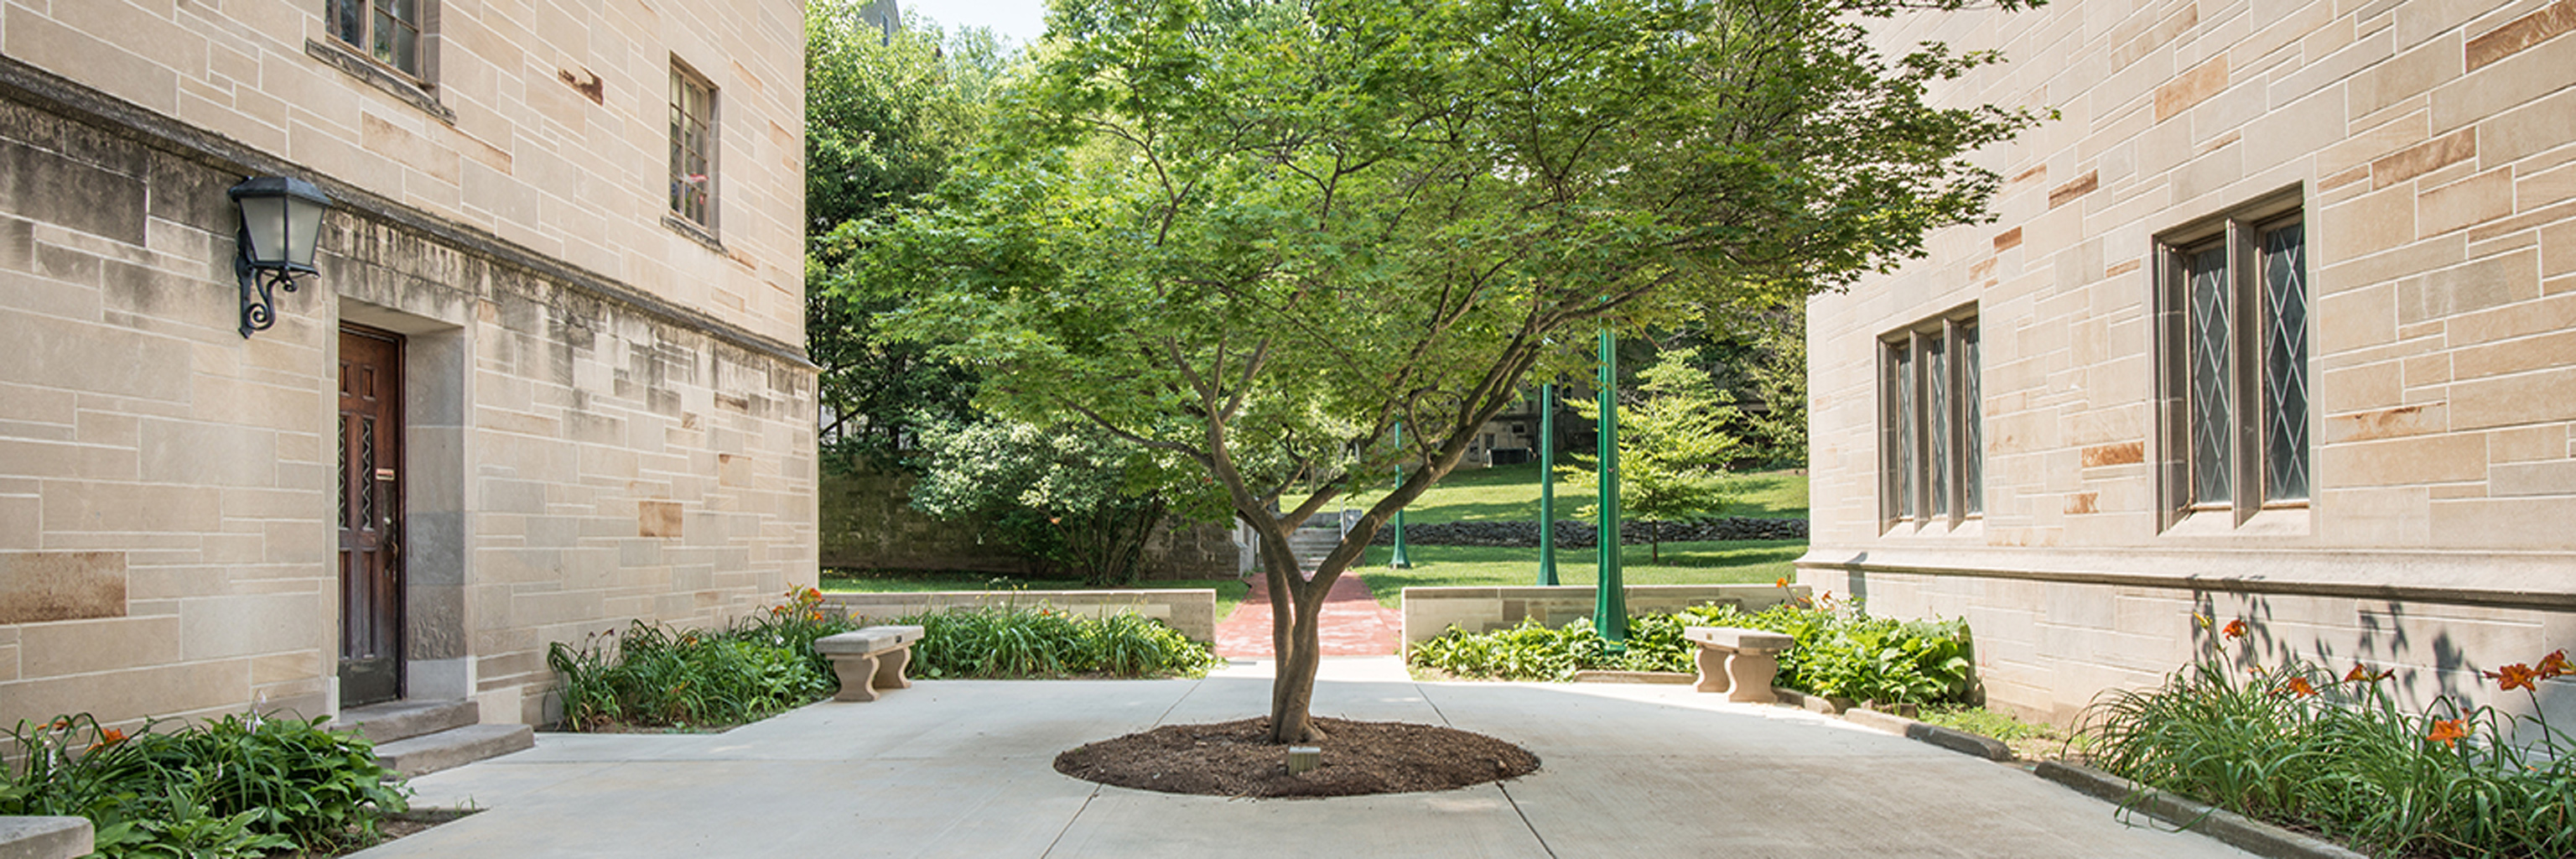 Tree growing in the courtyard by Sycamore Hall.